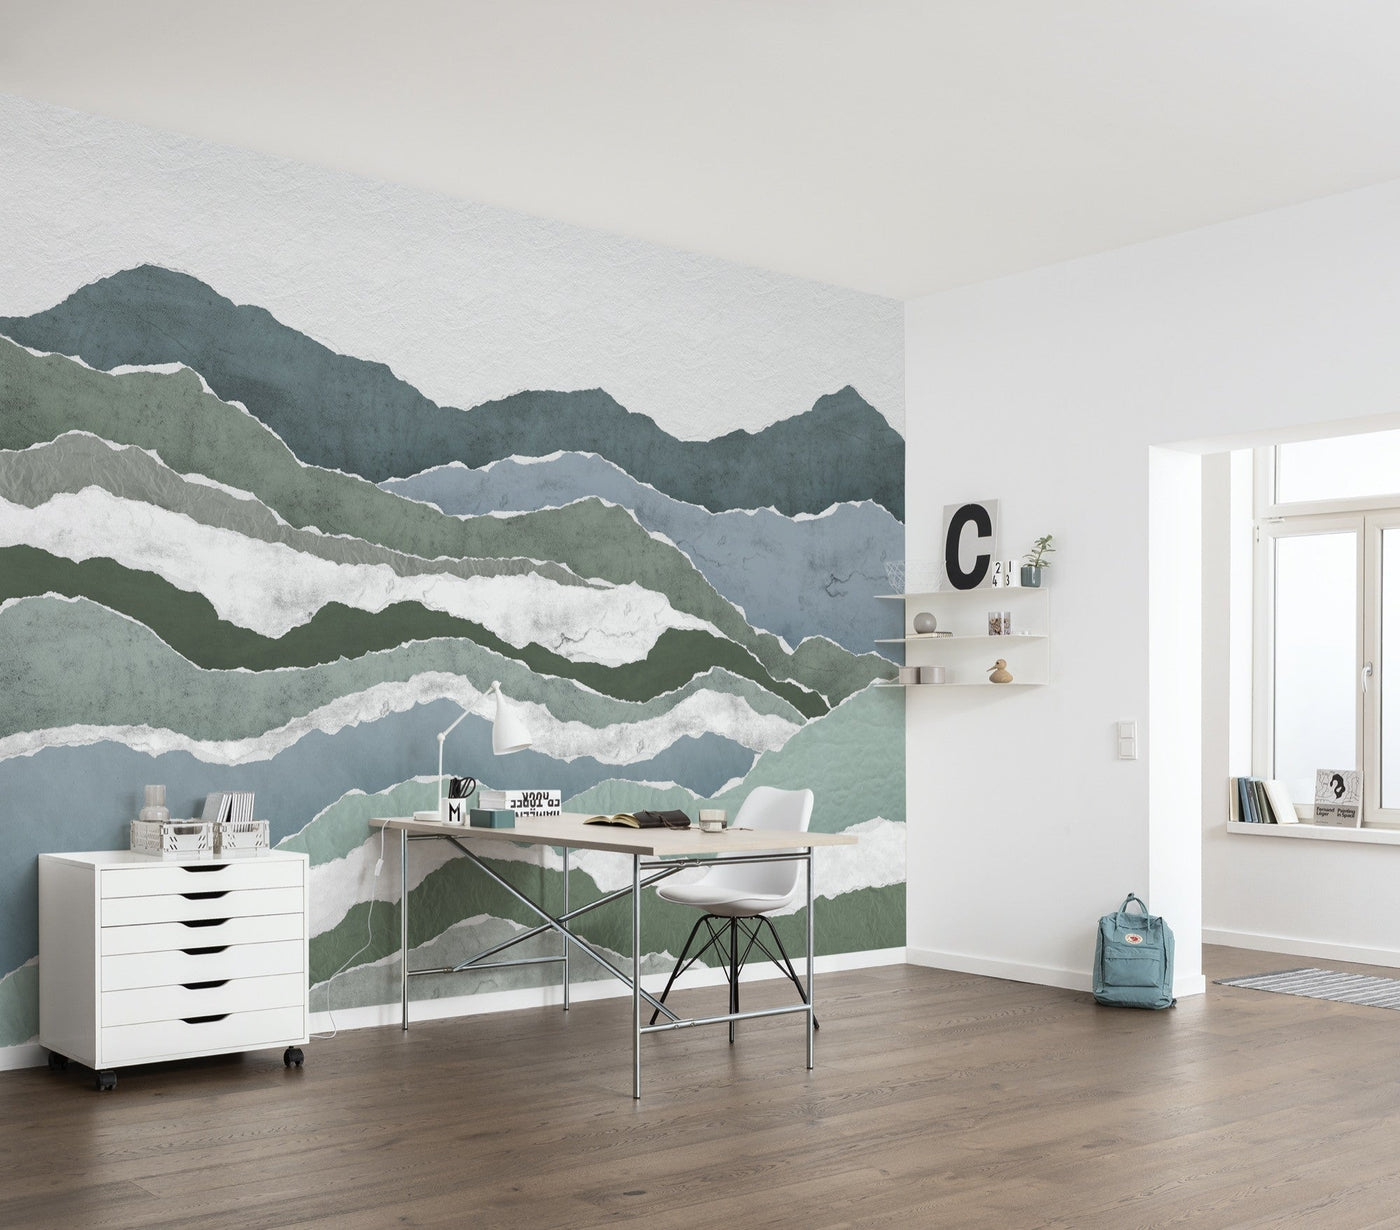 Royal Peaks Mural Wallpaper-Wall Decor-ABSTRACT WALLPAPERS, ART WALLPAPER, ECO MURALS, LANDSCAPE WALLPAPERS, MOUNTAIN WALLPAPERS, MURALS, MURALS / WALLPAPERS, NON-WOVEN WALLPAPER-Forest Homes-Nature inspired decor-Nature decor